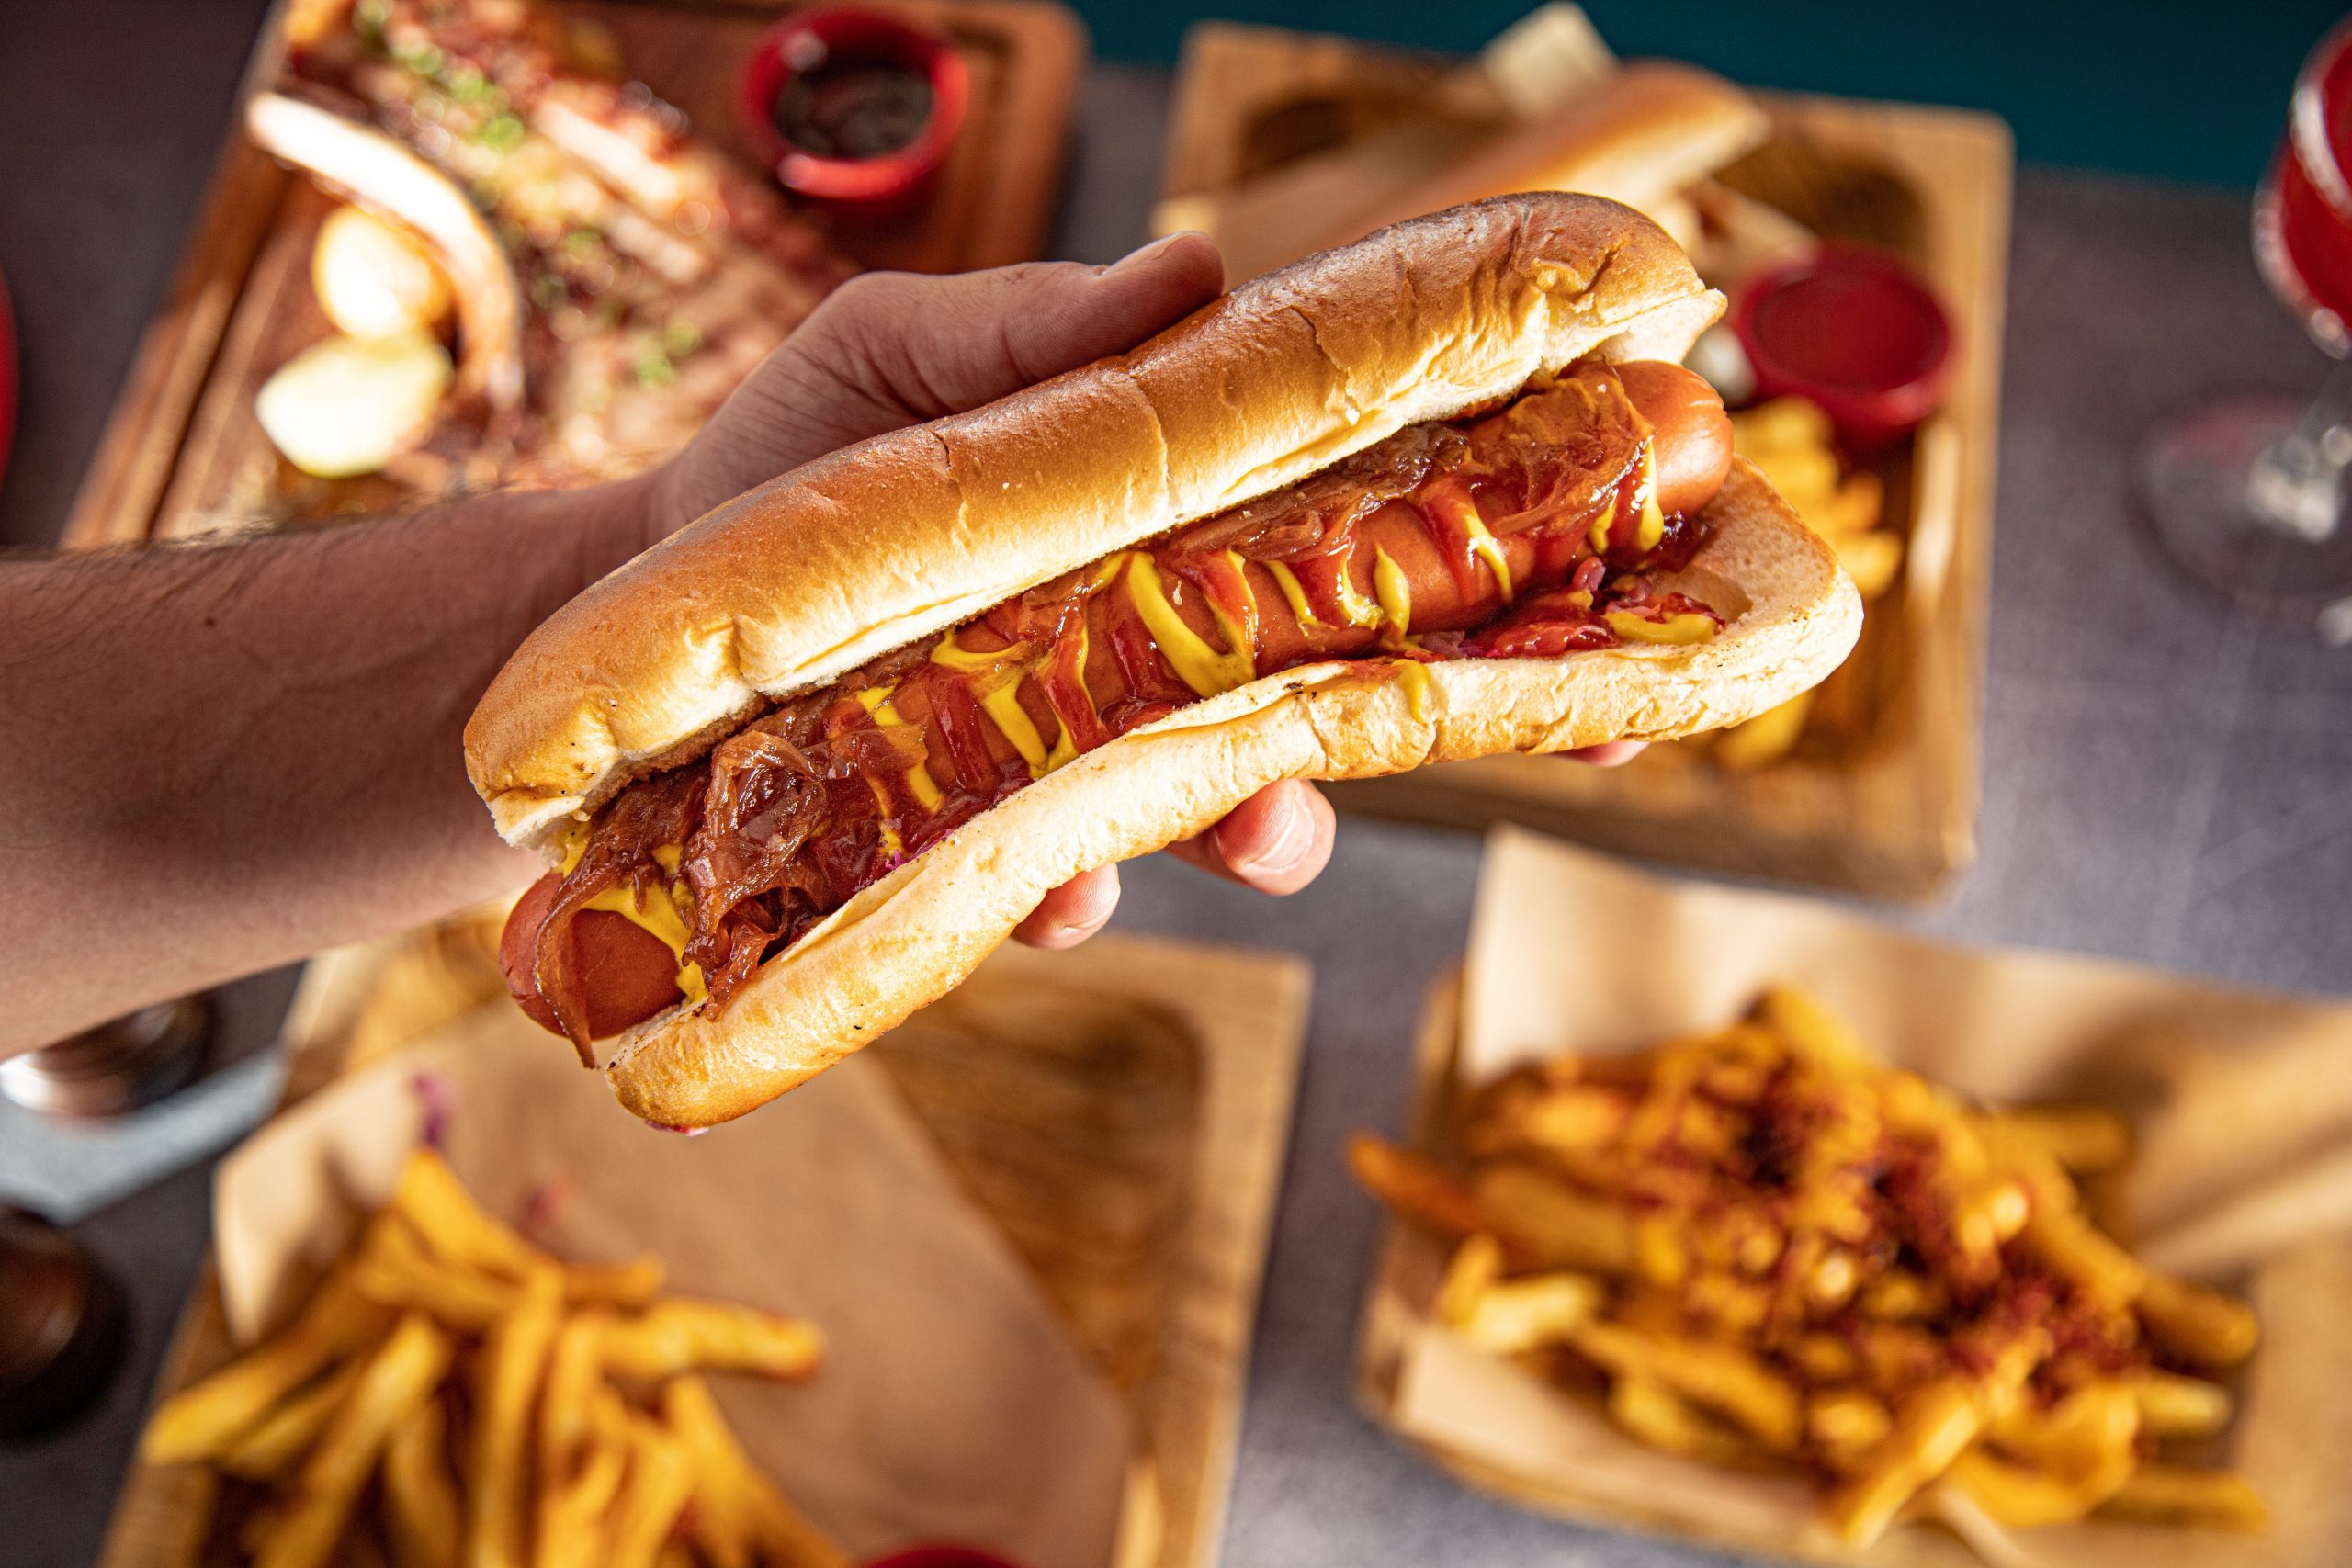 National Hot Dog Day 2022: History and significance